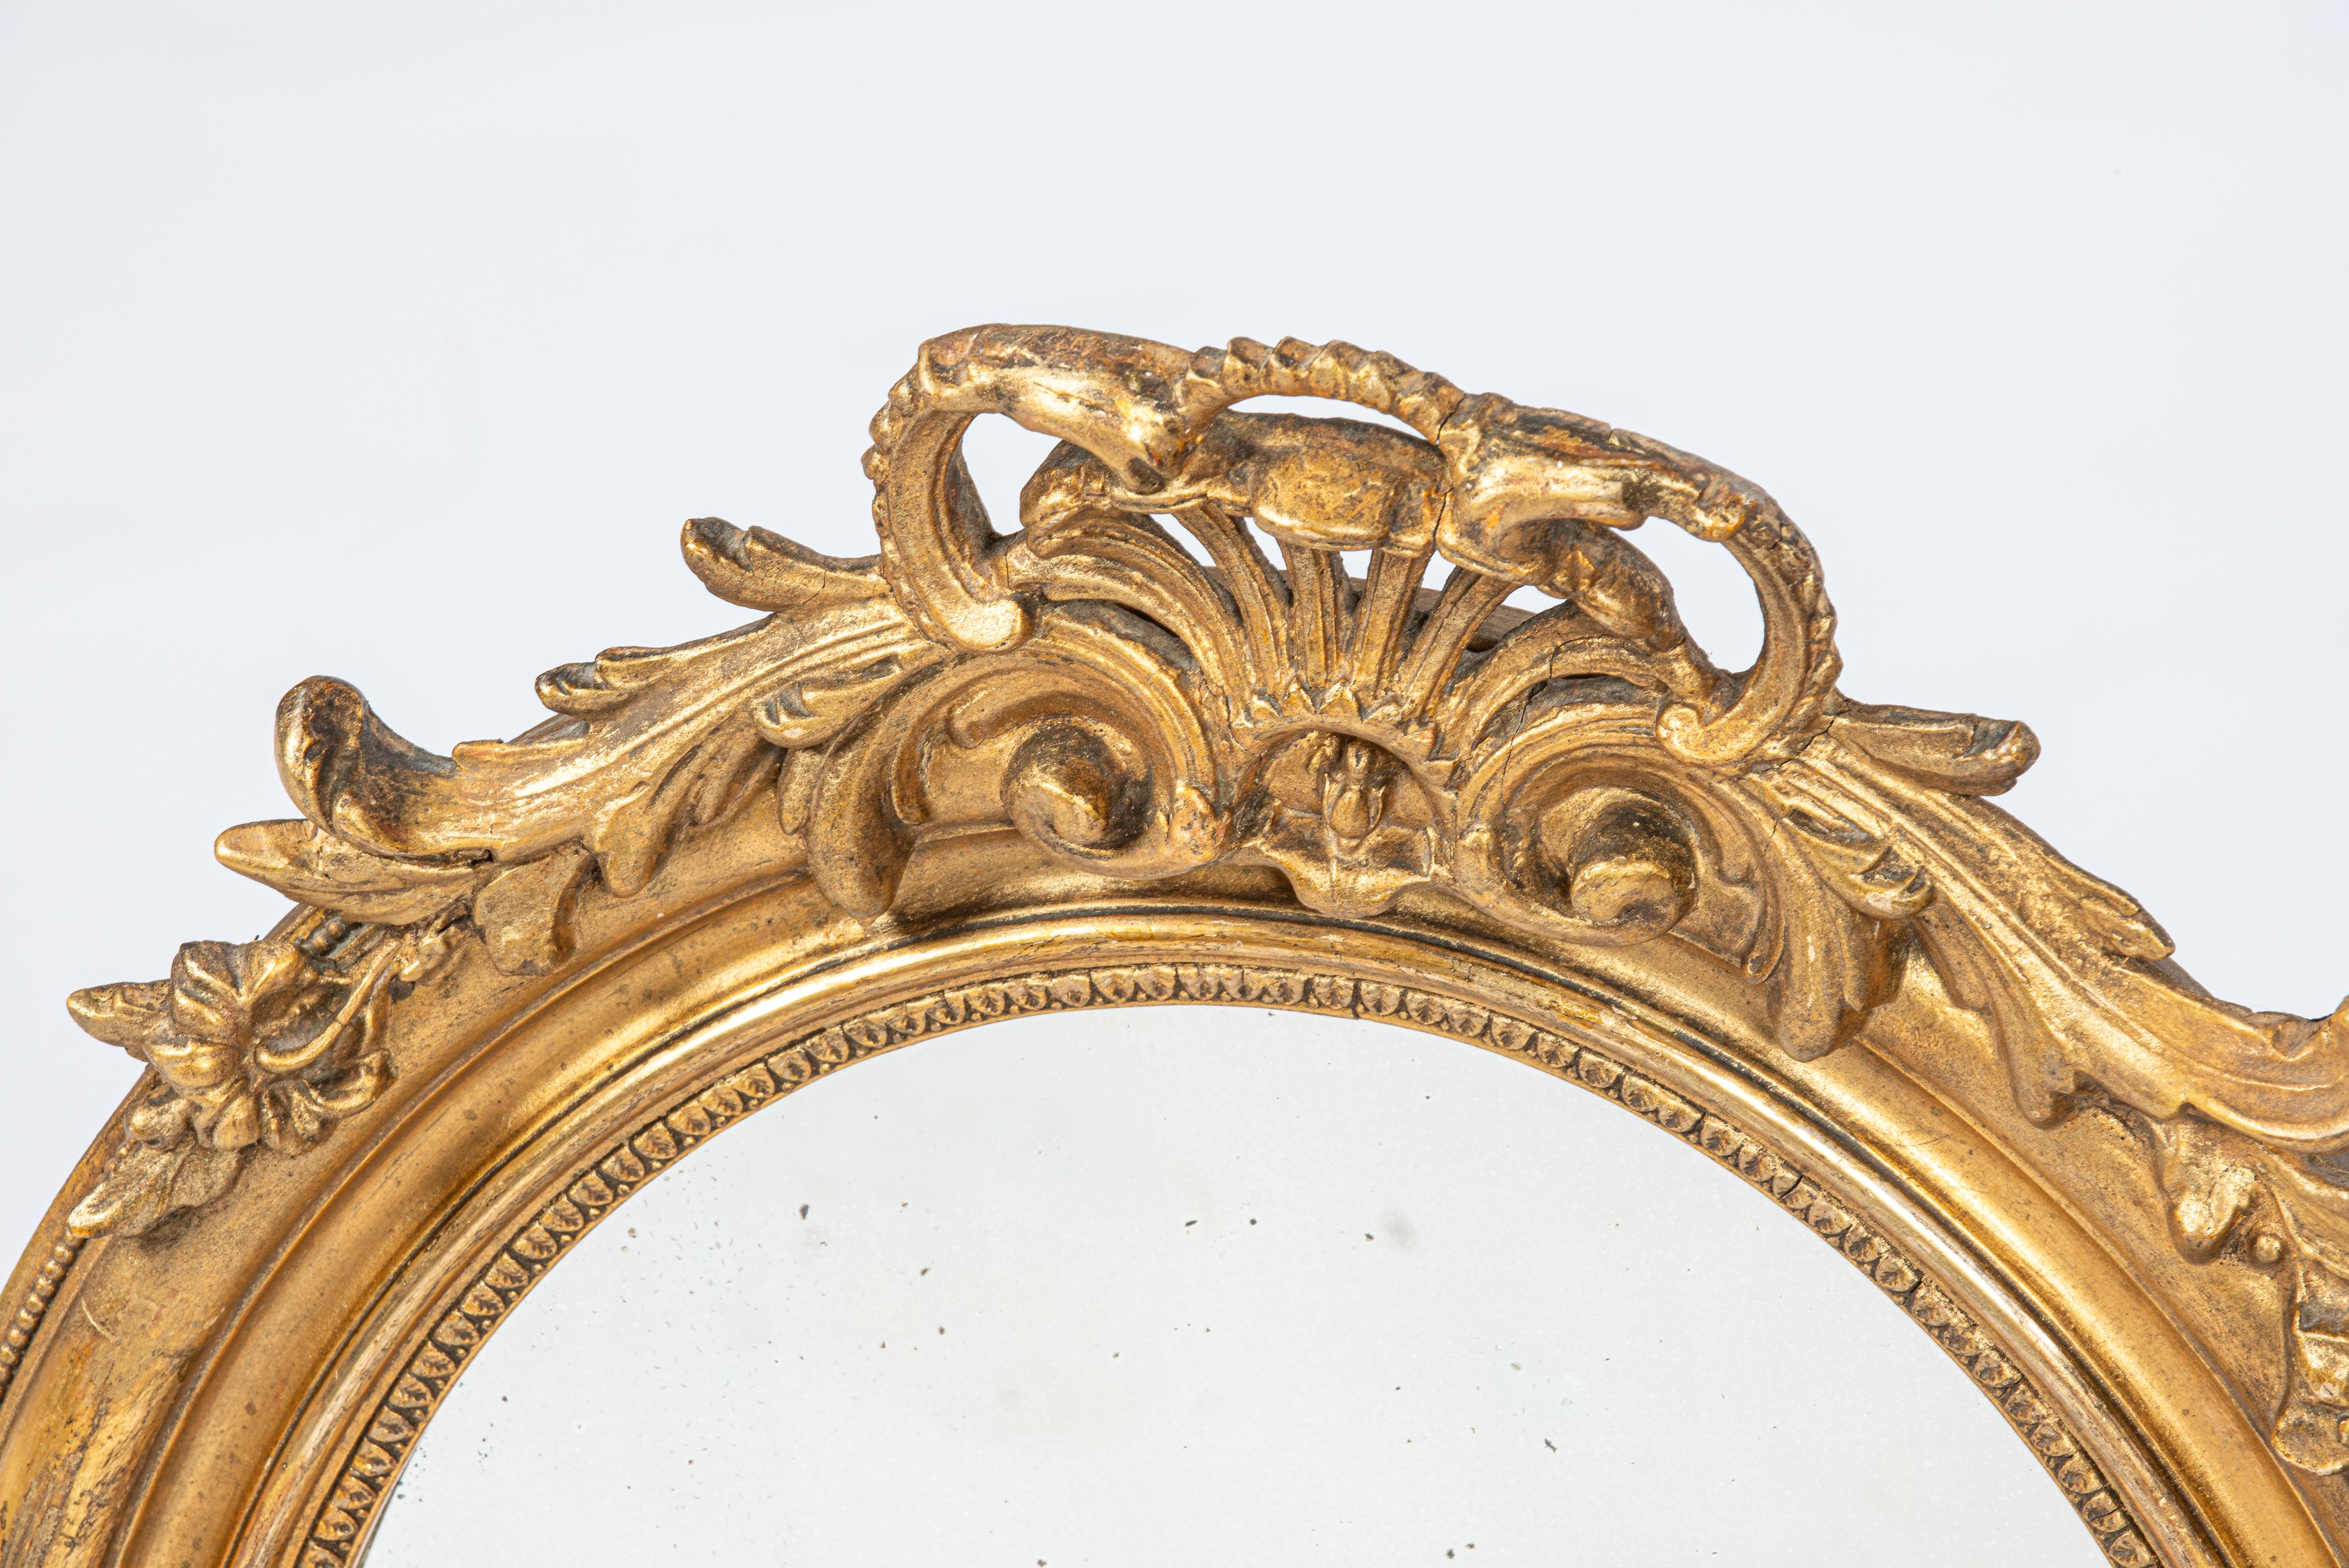 On offer here is a beautiful small oval mirror, crafted in France in the latter half of the 19th century, circa 1870. The mirror frame features a smooth pine wood frame coated with gesso. It's adorned with rich ornamentation including shell motifs,